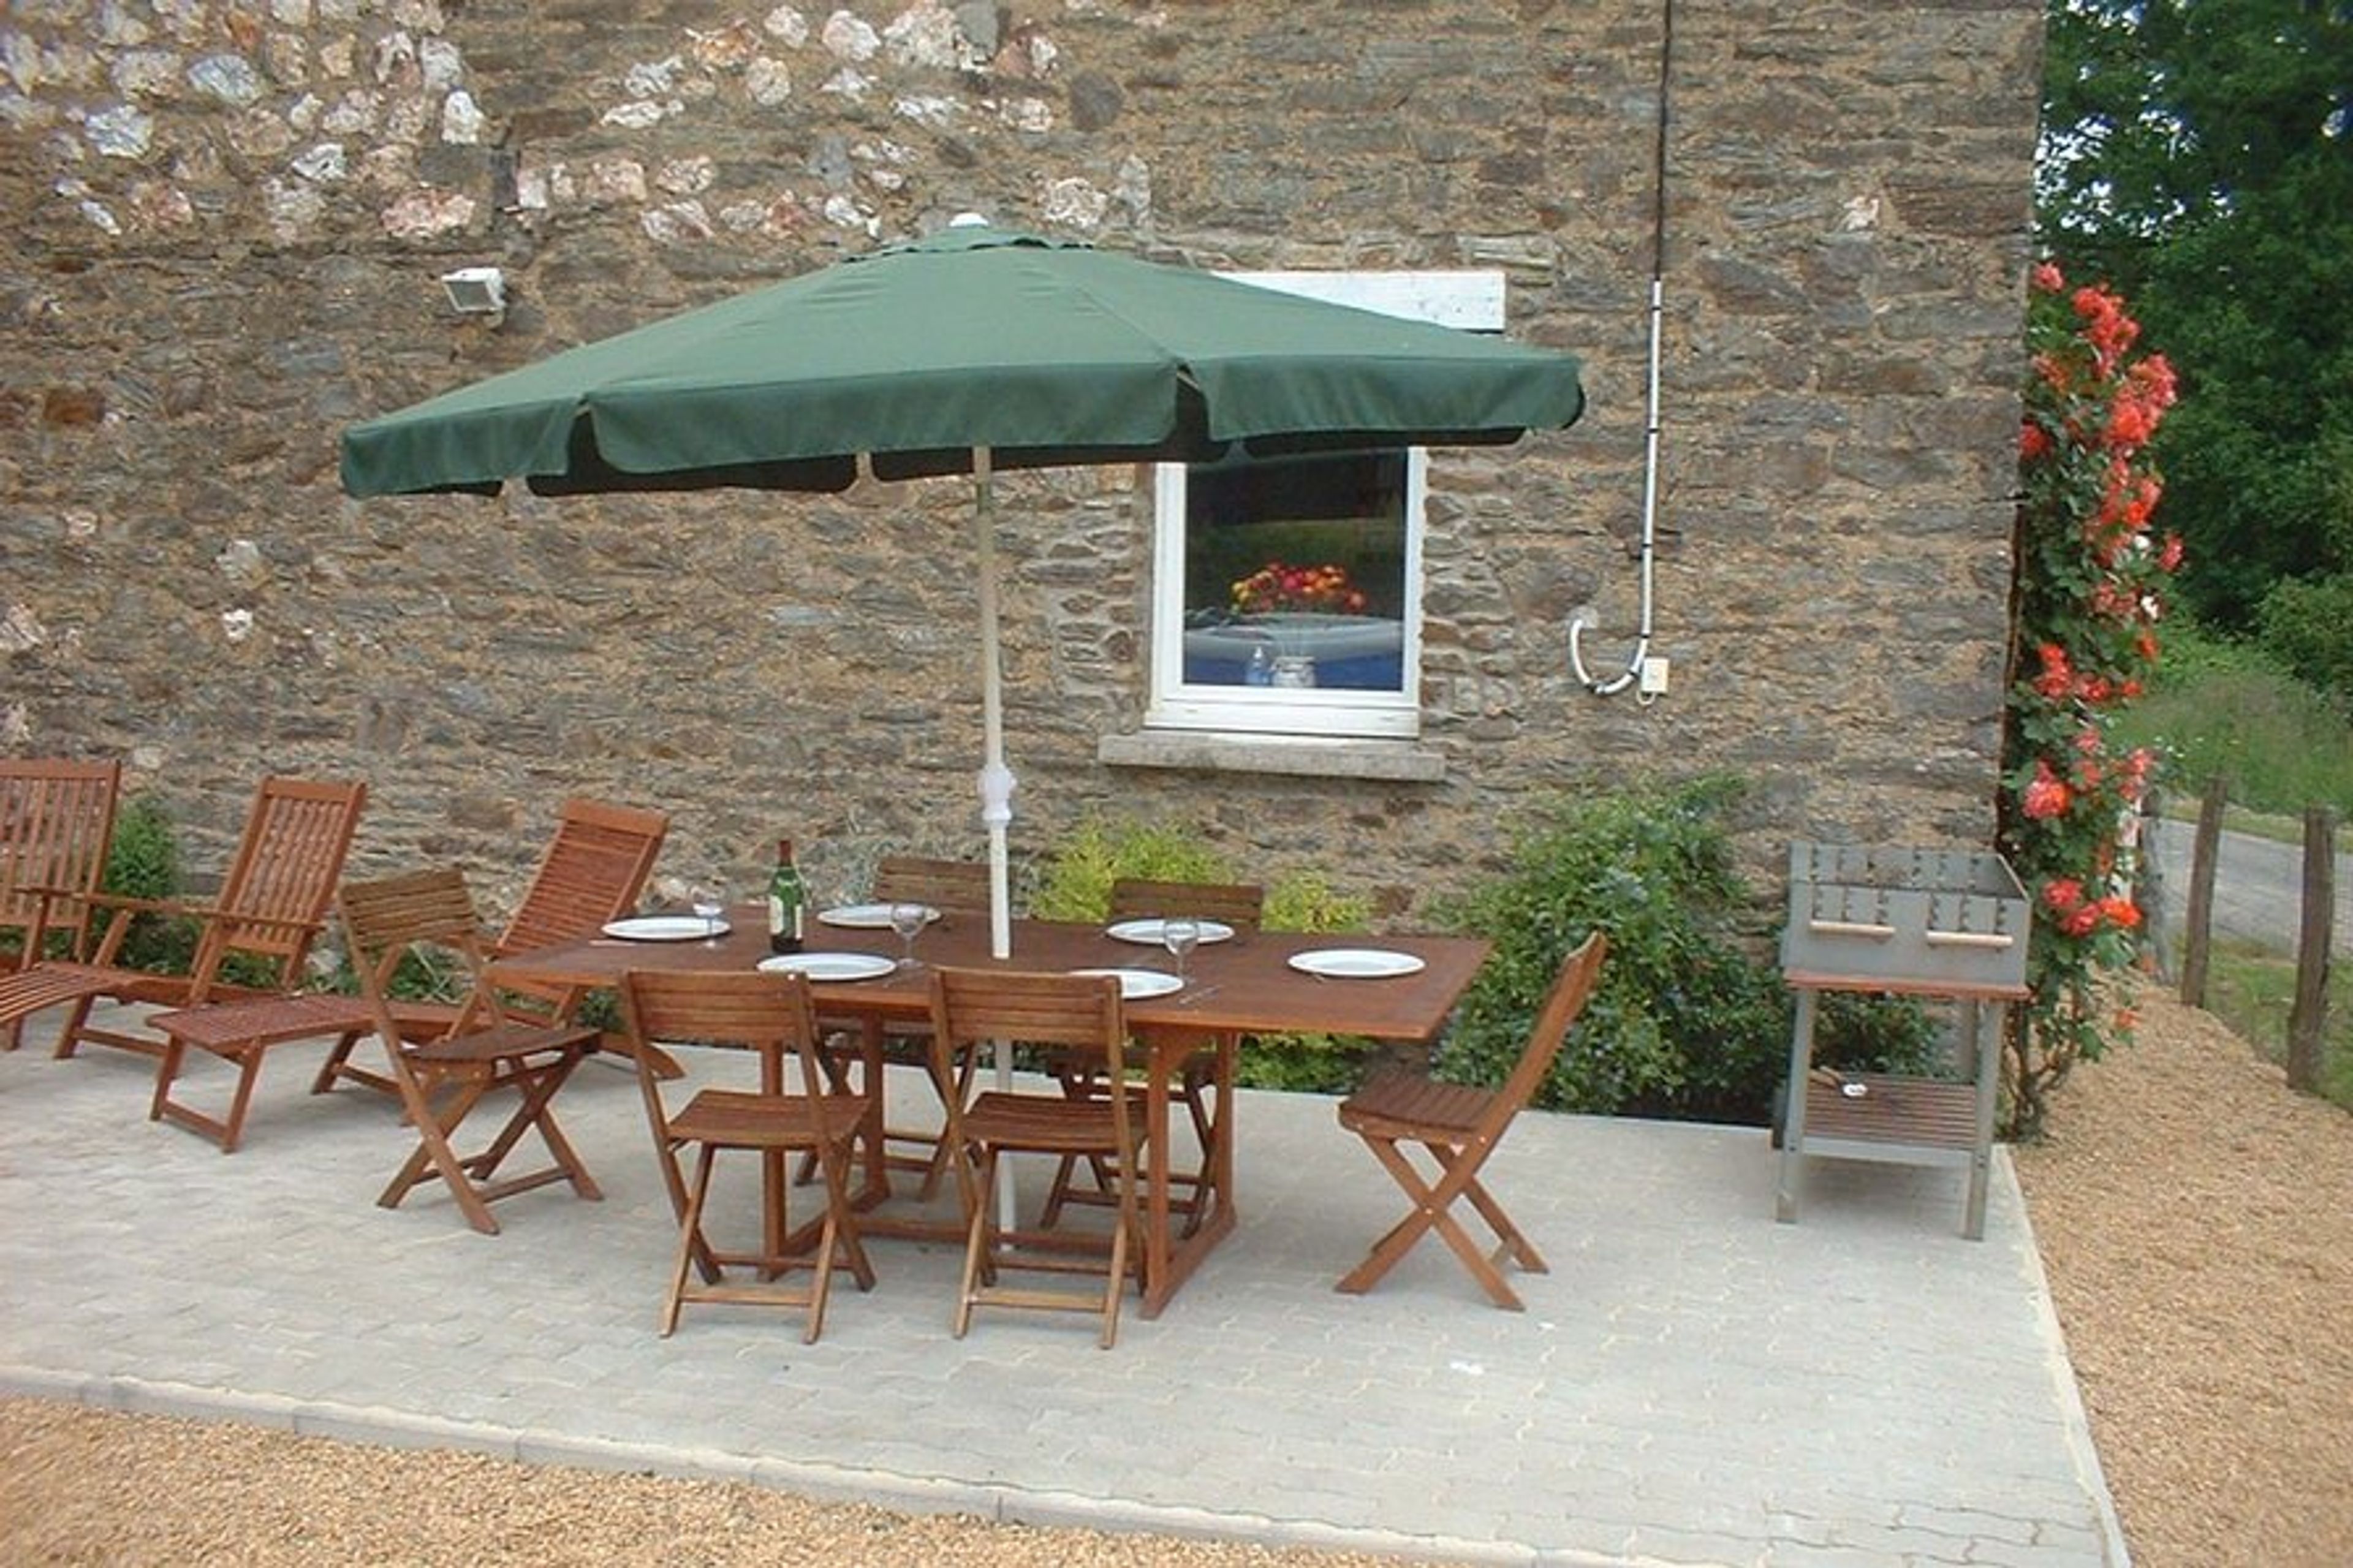 Plenty of room to dine outside and enjoy the tranquility